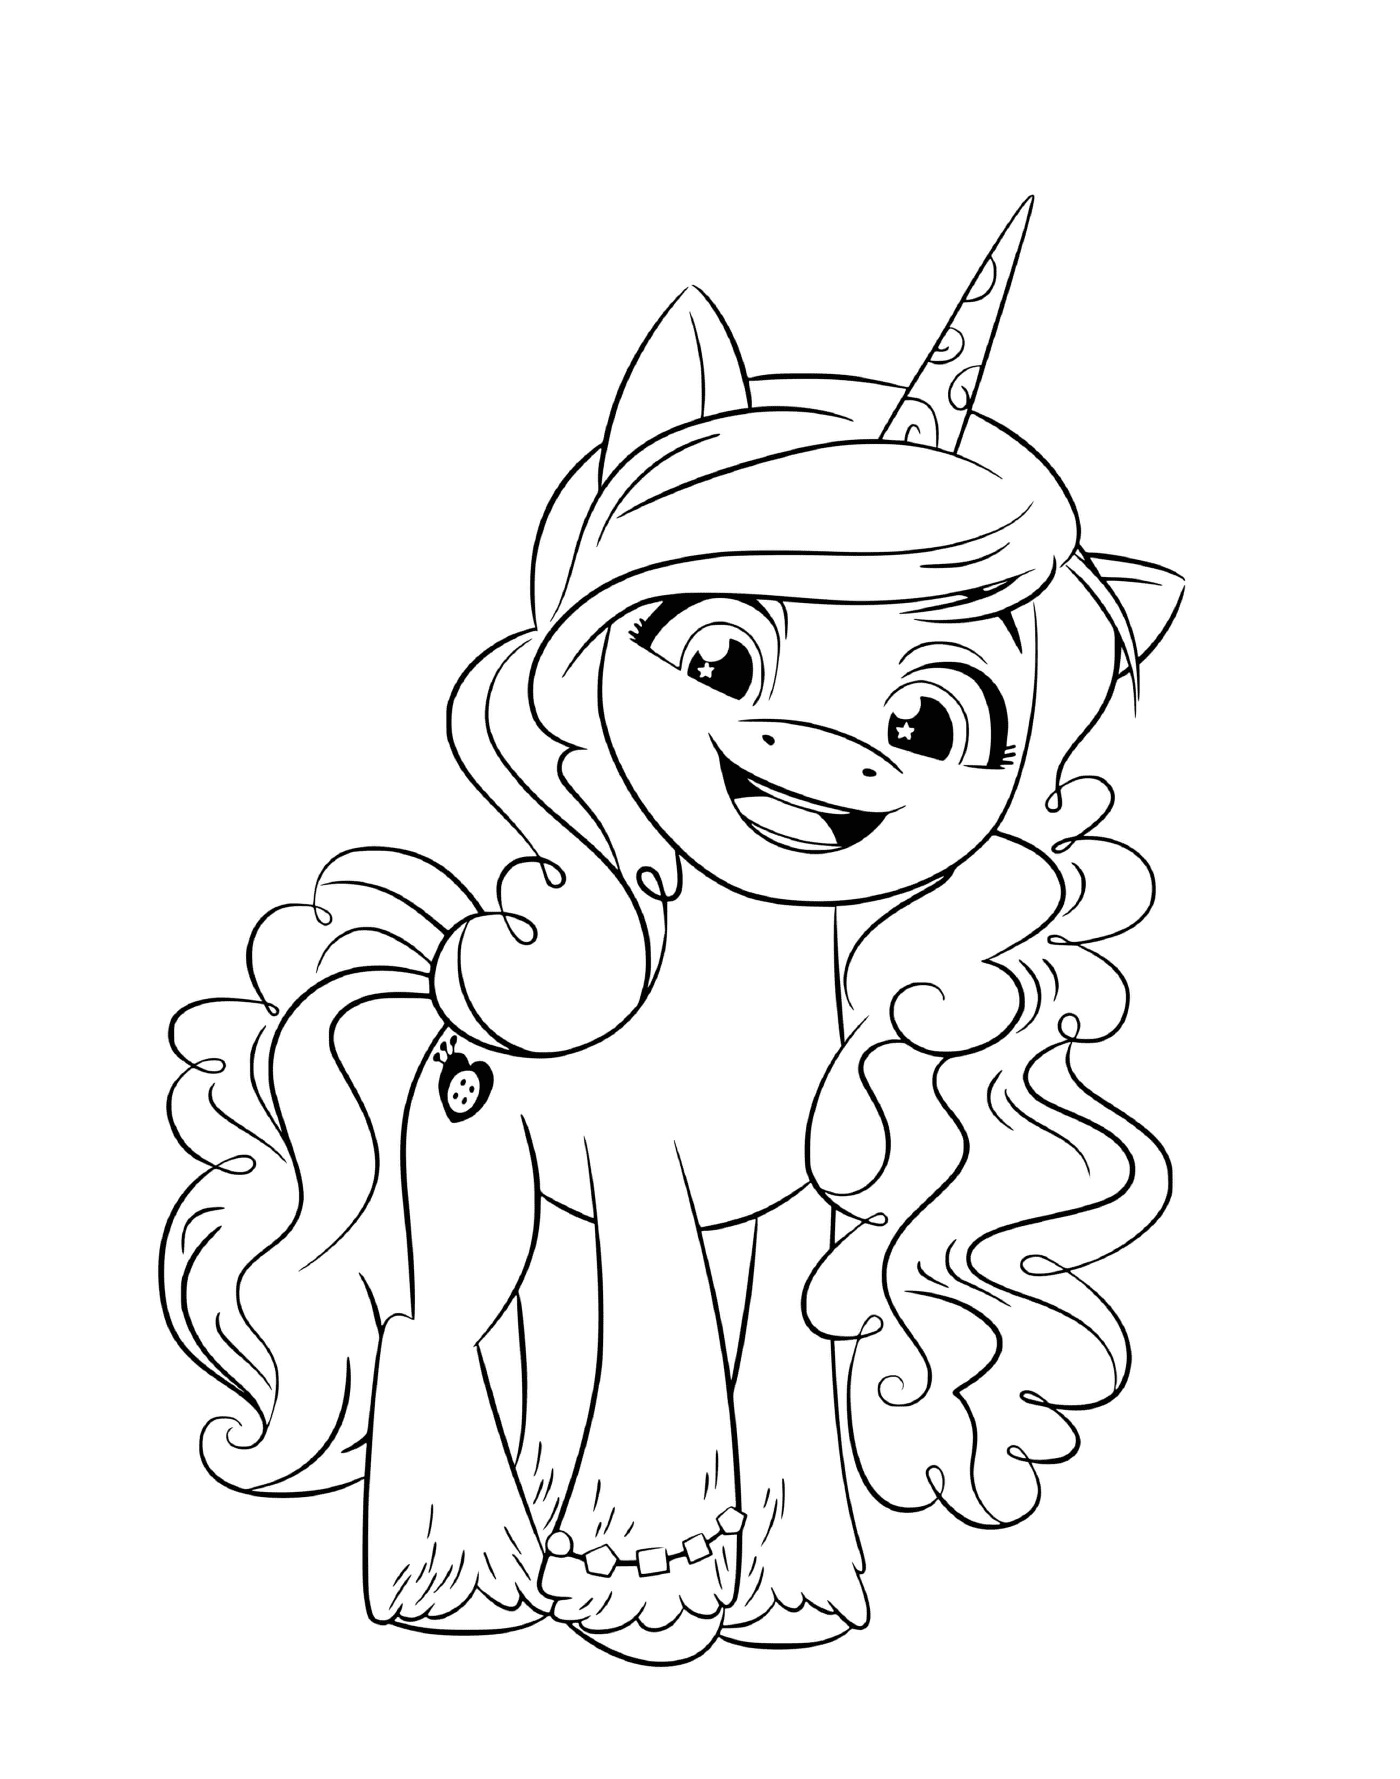 coloriage izzy moonbow loves crafting mlp 5